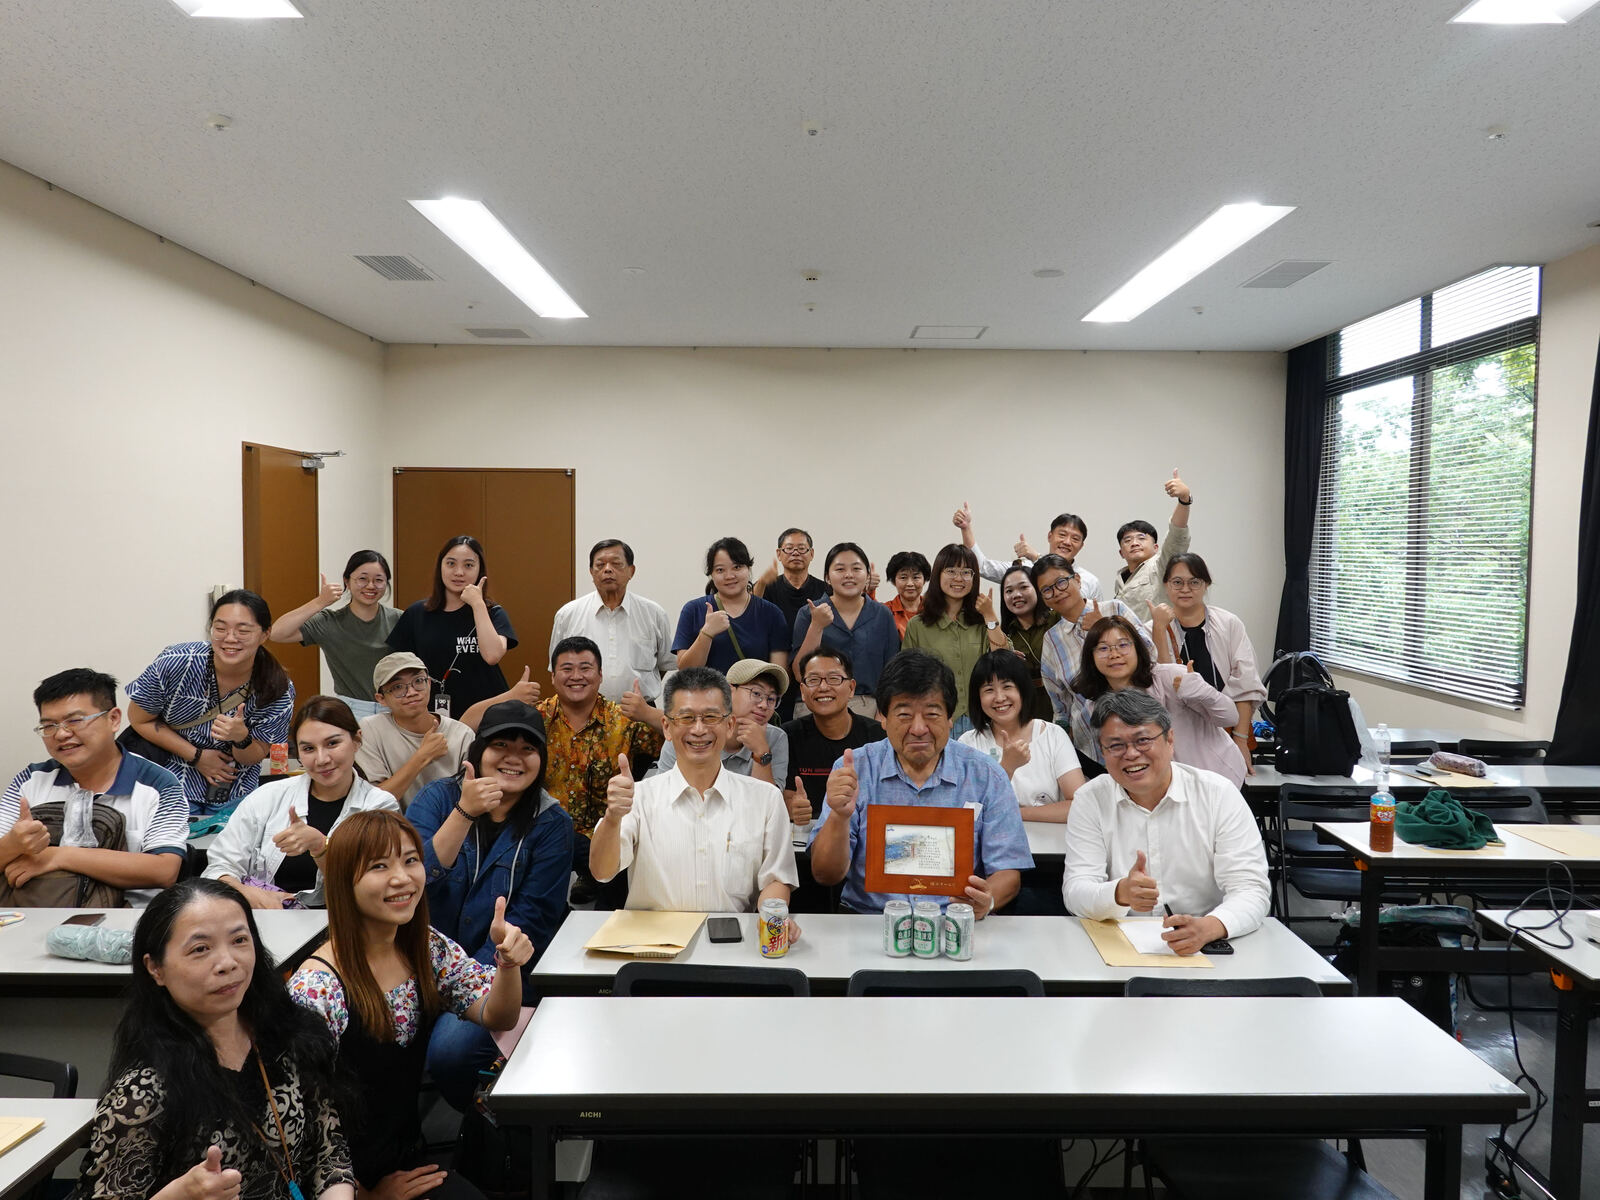 The group photo of presenting Mr. Watanabe’s favorite Taiwan beer as a gift